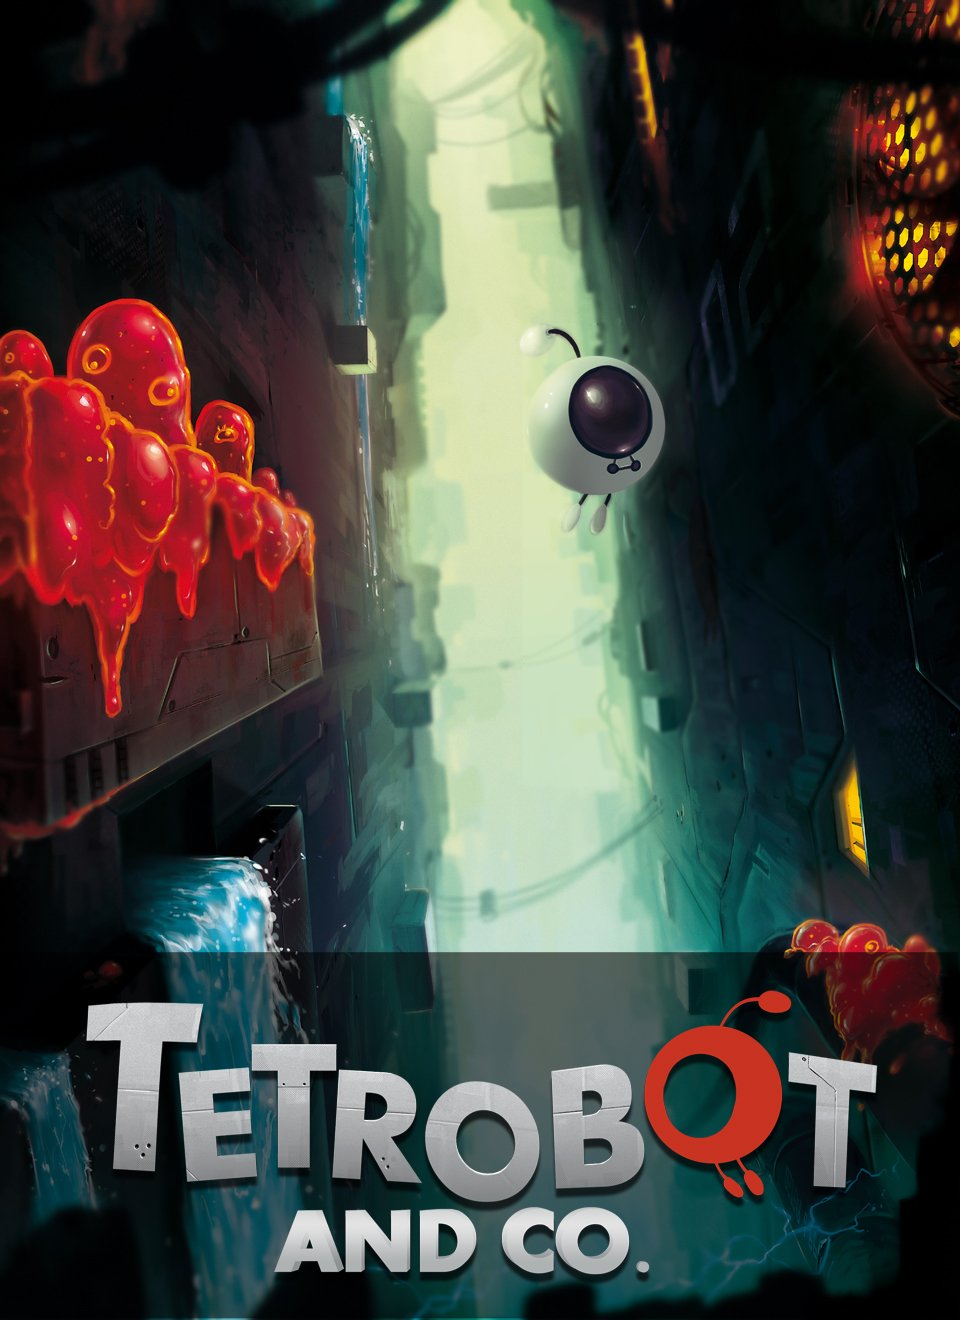 Image of Tetrobot and Co.